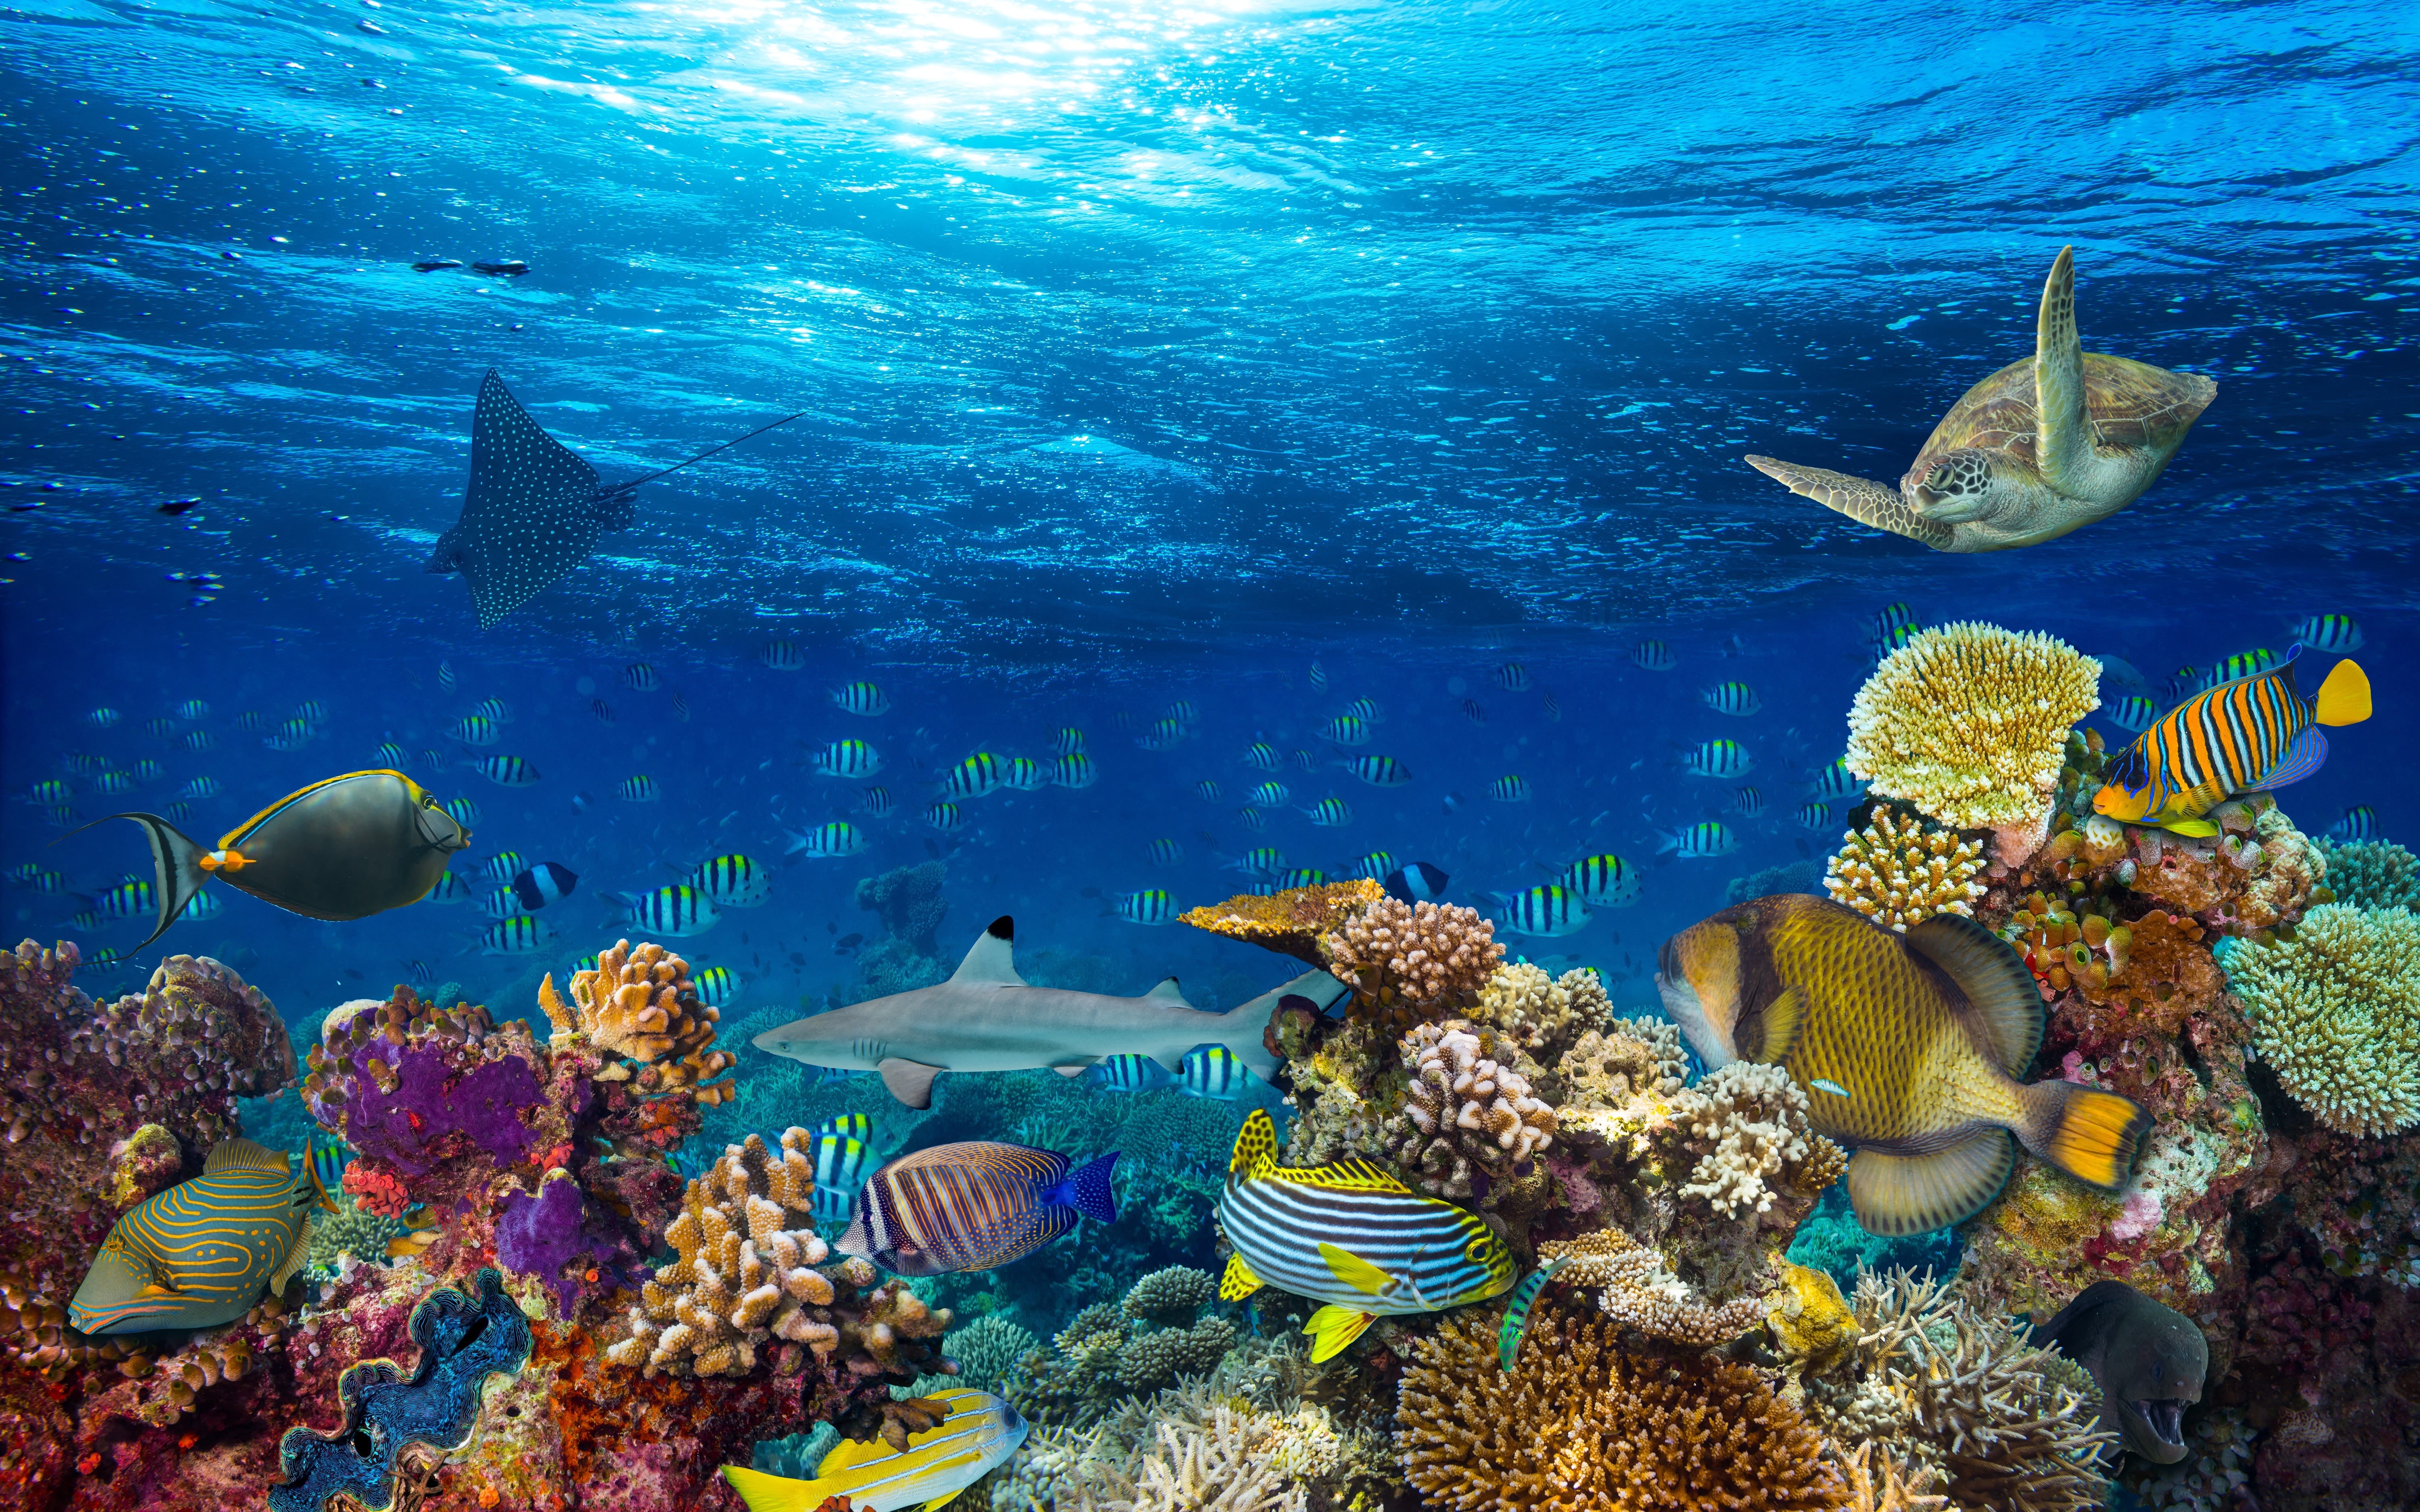 An image of the coral reef in the Maldives